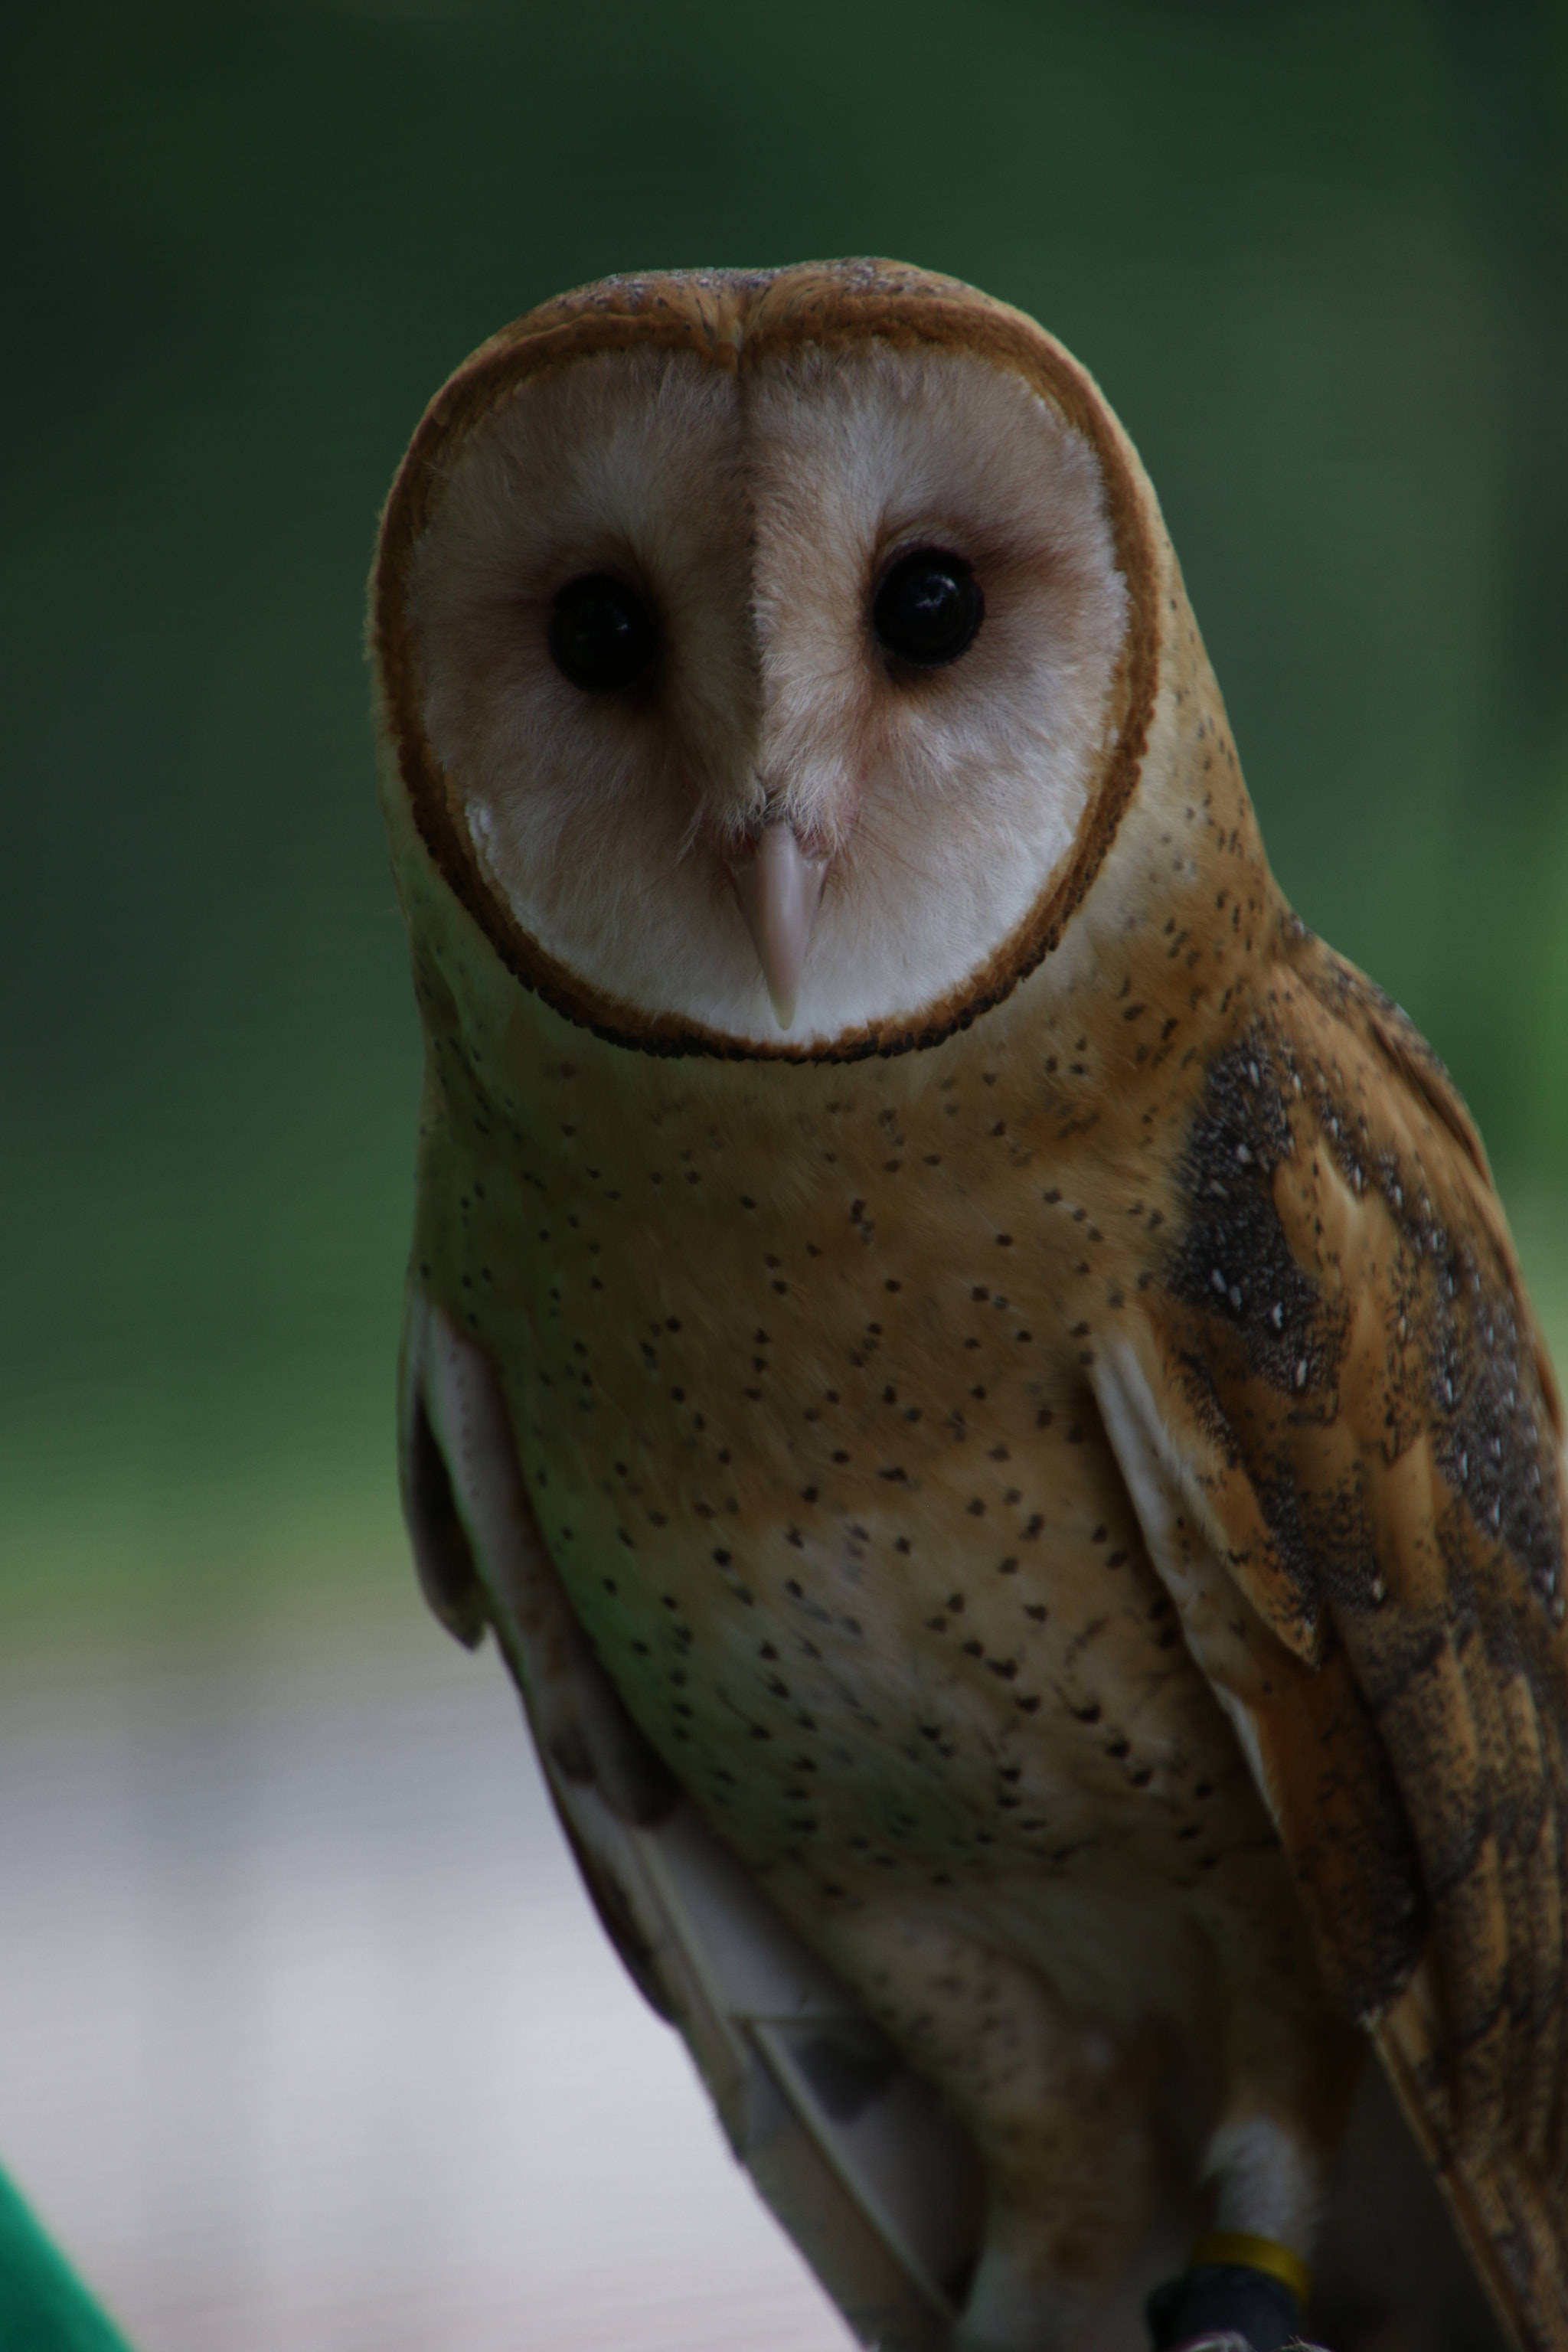 Tamron 16-300mm F3.5-6.3 Di II VC PZD Macro sample photo. Barn owl looking right at me photography